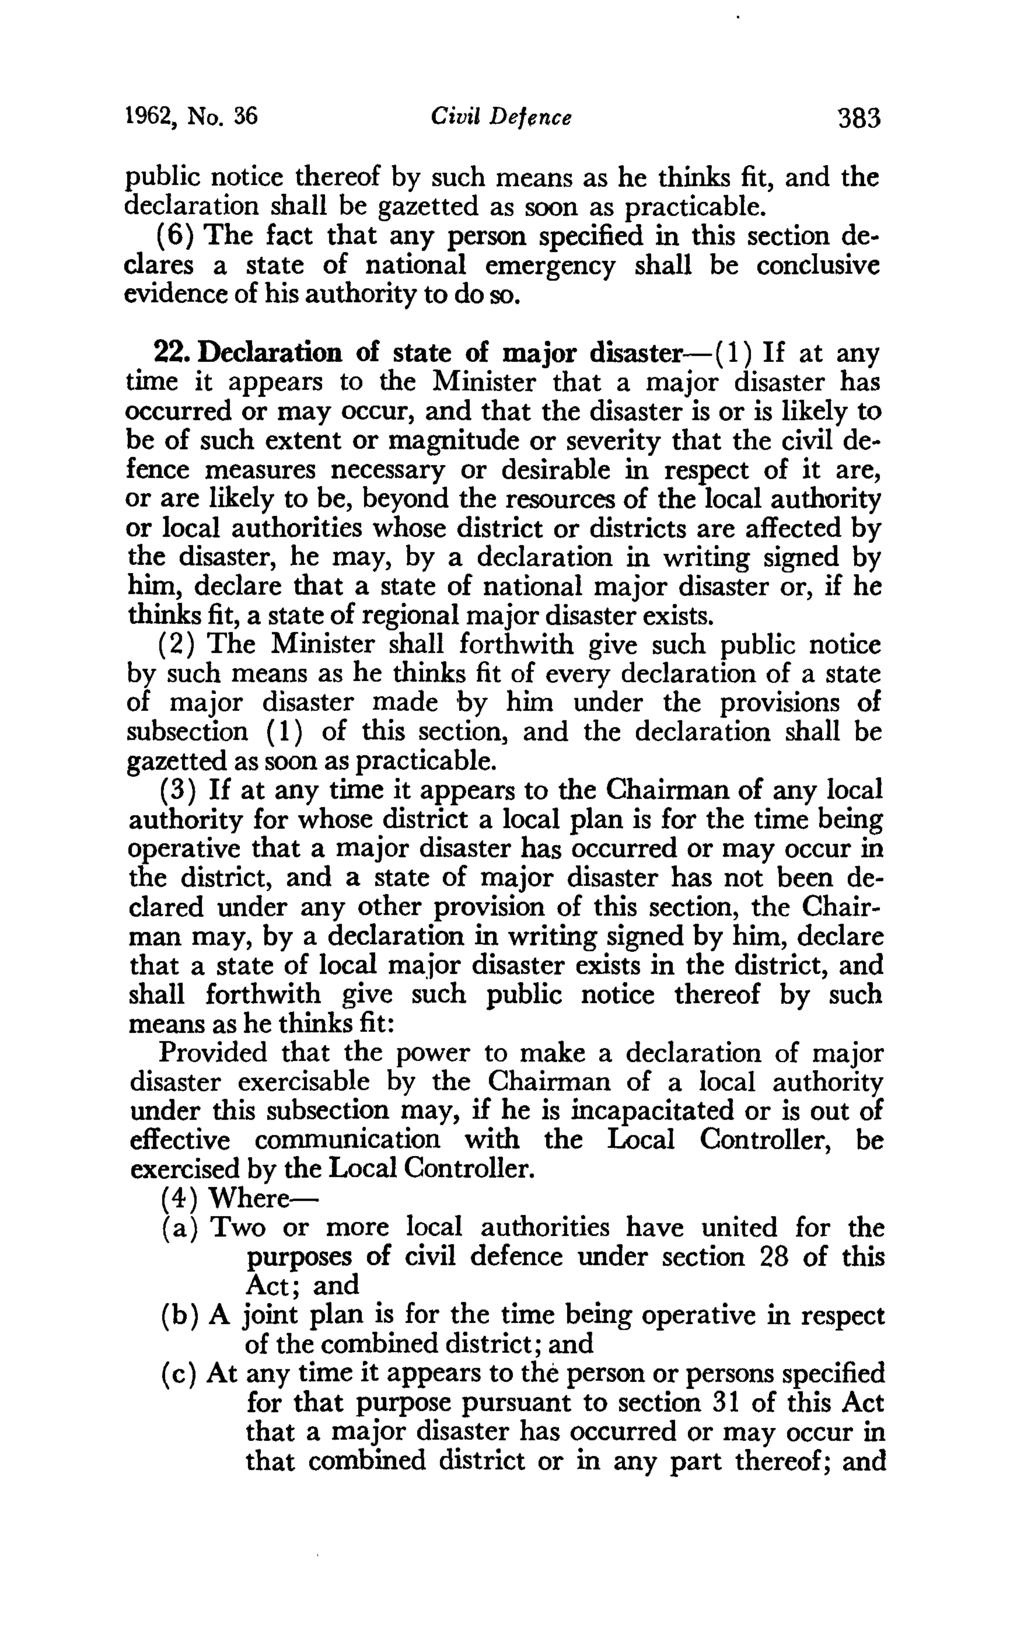 1962, No. 36 Civil Defence 383 public notice thereof by such means as he thinks fit, and the declaration shall be gazetted as soon as practicable.